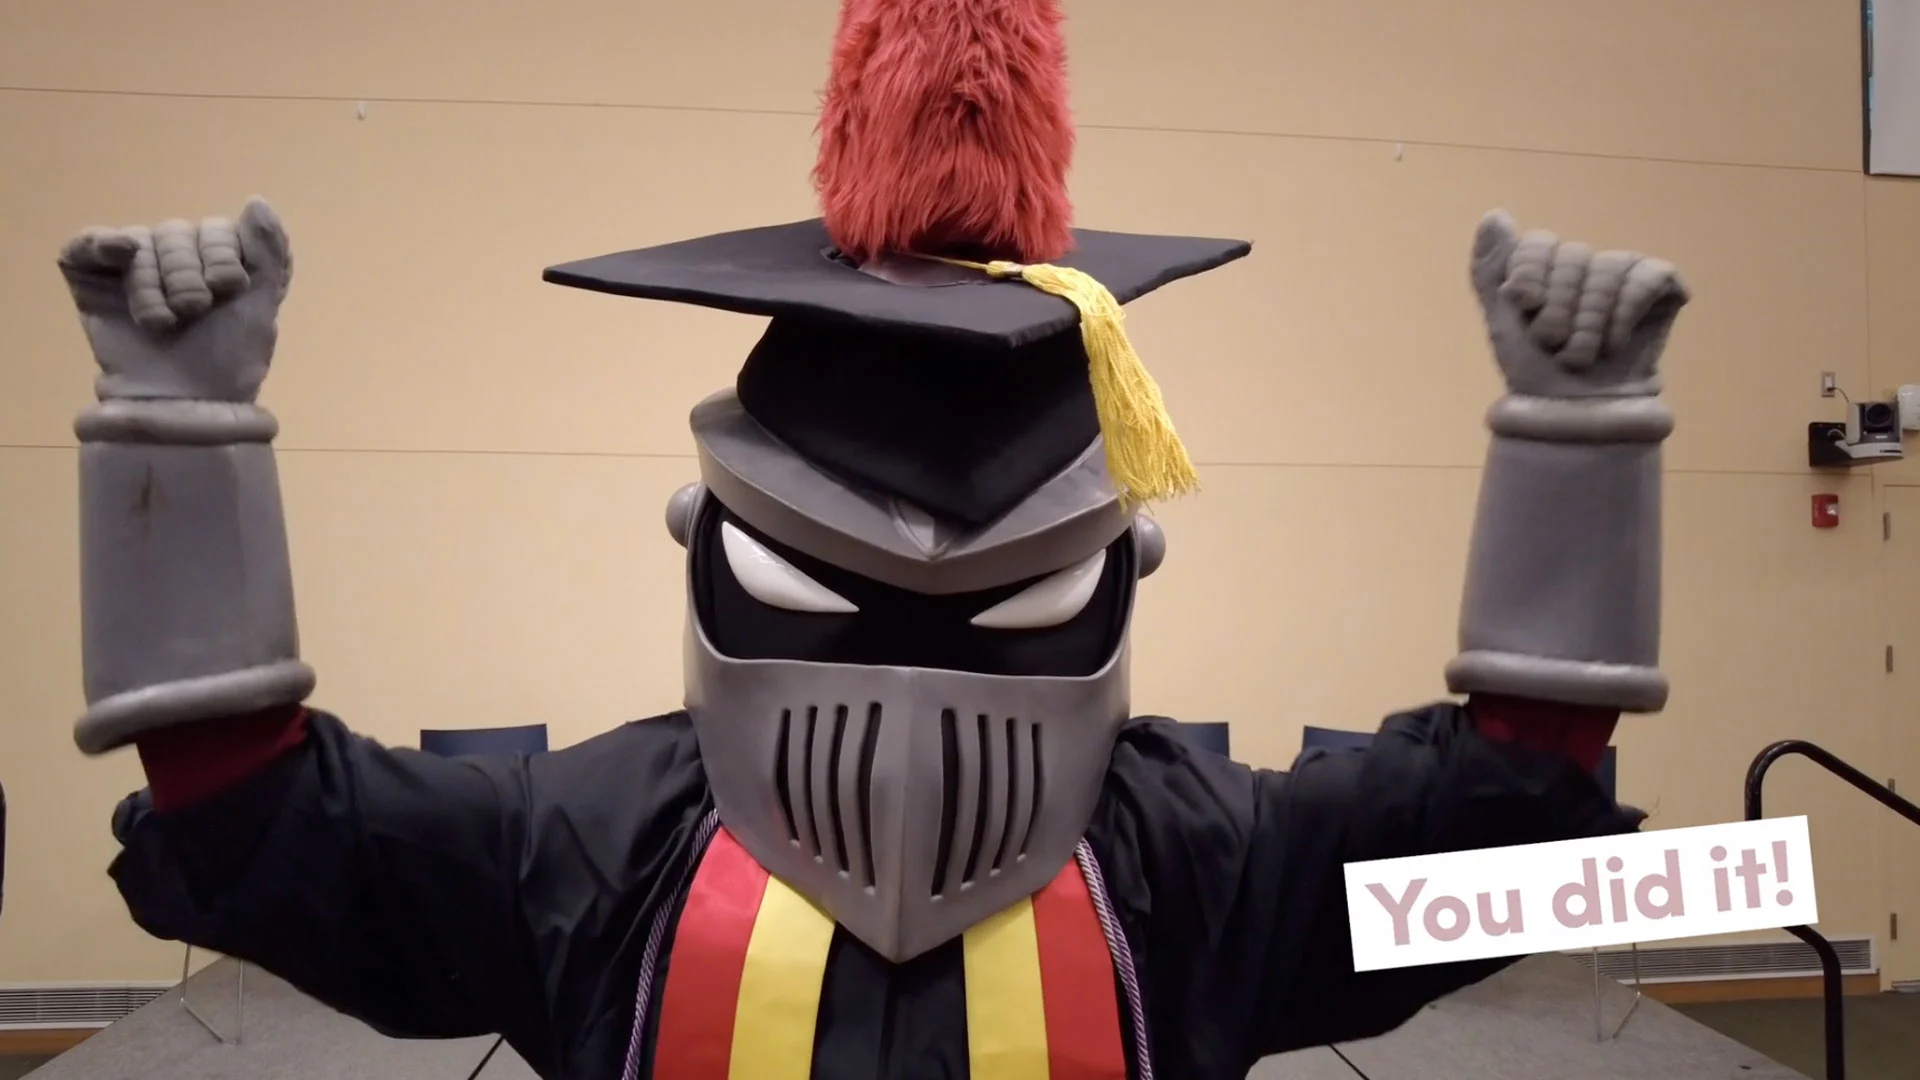 The Knight mascot in a cap and gown